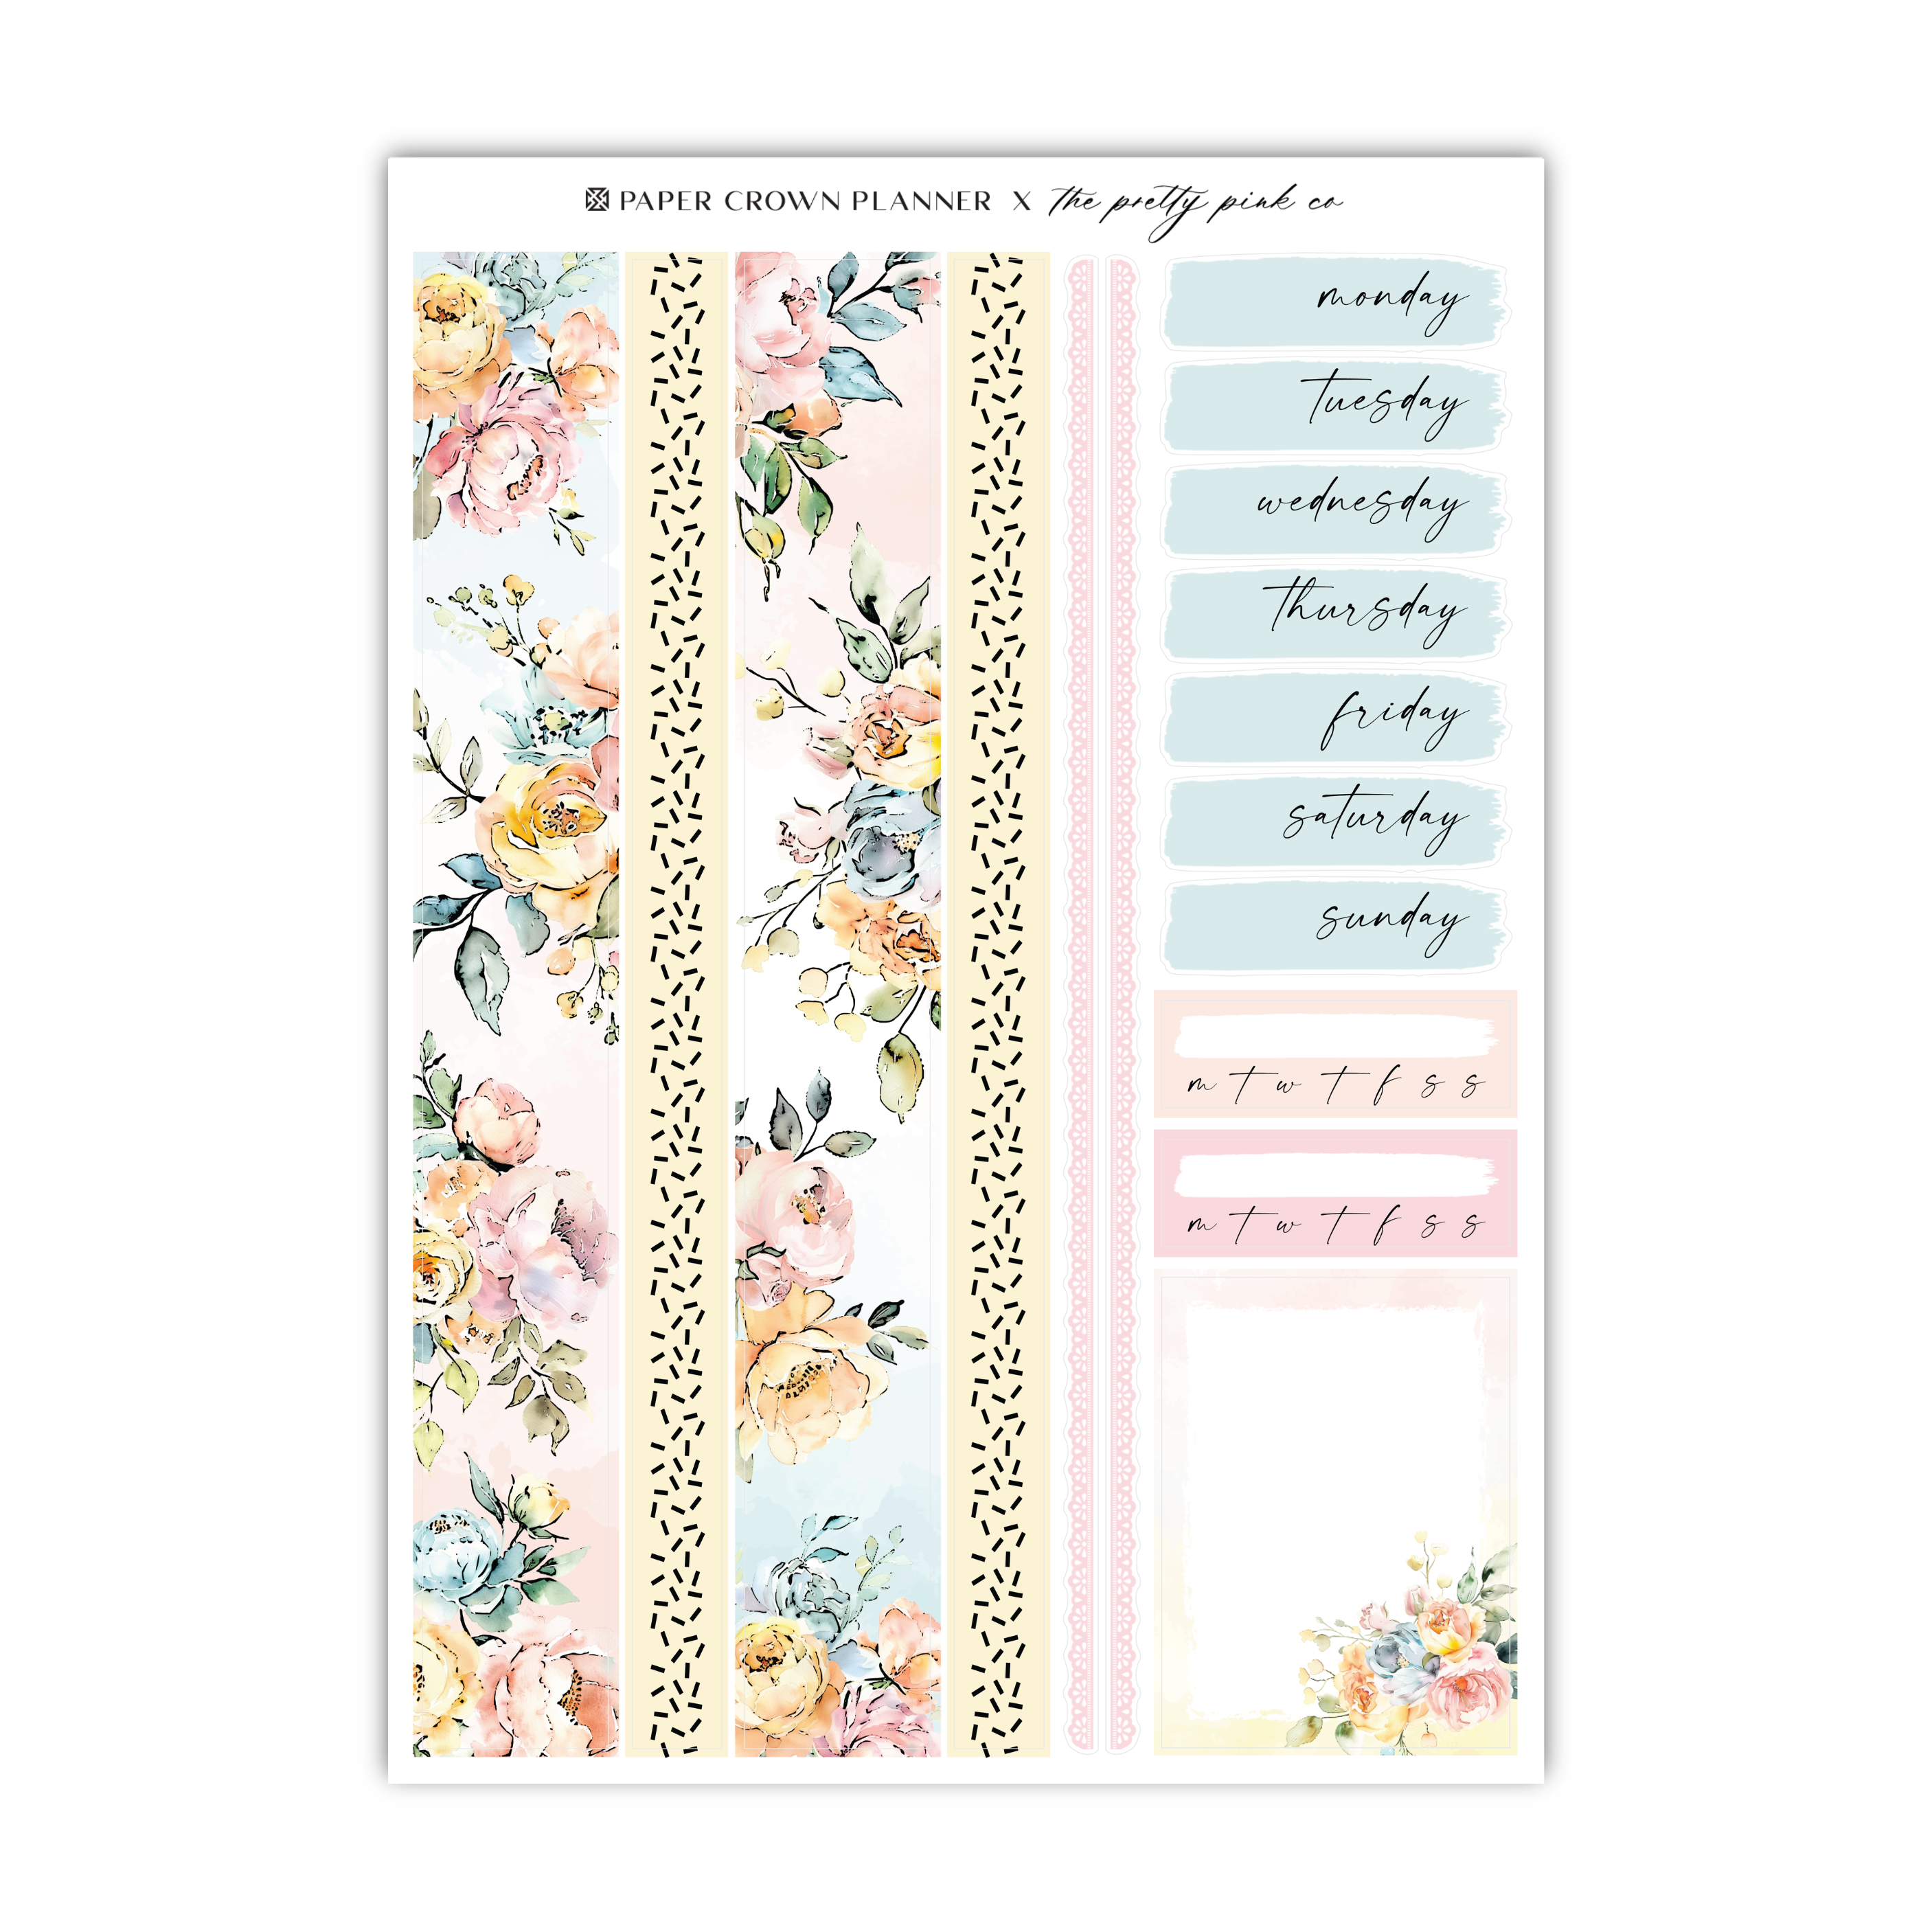 a planner sticker with flowers and stripes